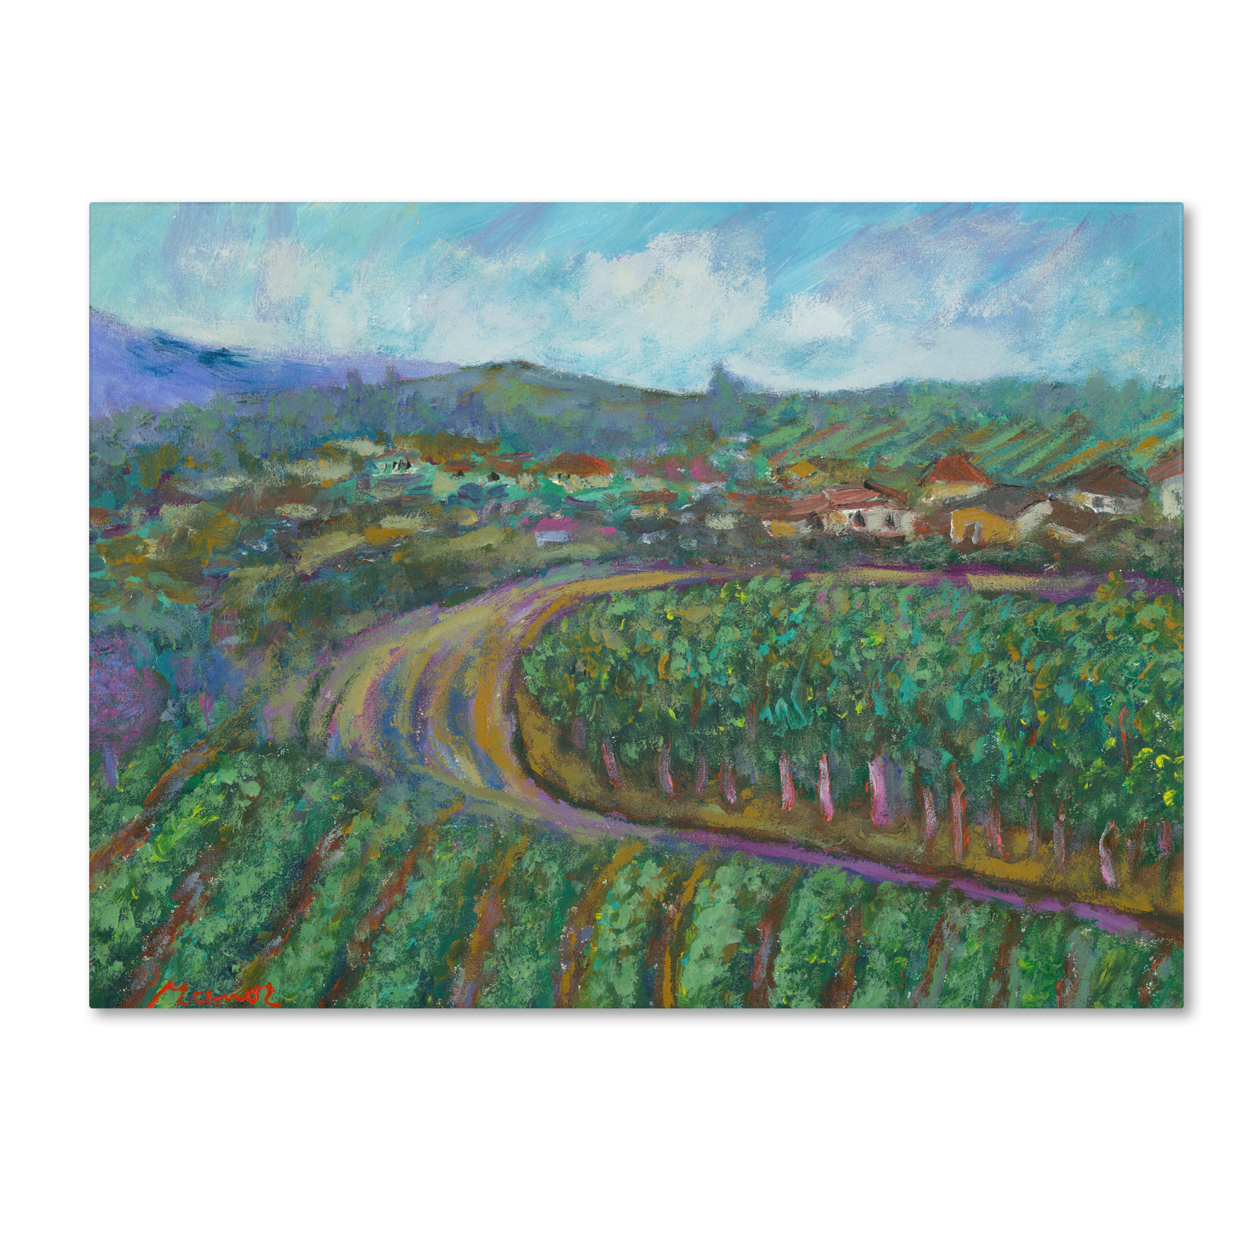 Manor Shadian 'Cherry Trees And Strawberry Fields' Canvas Wall Art 35 X 47 Inches